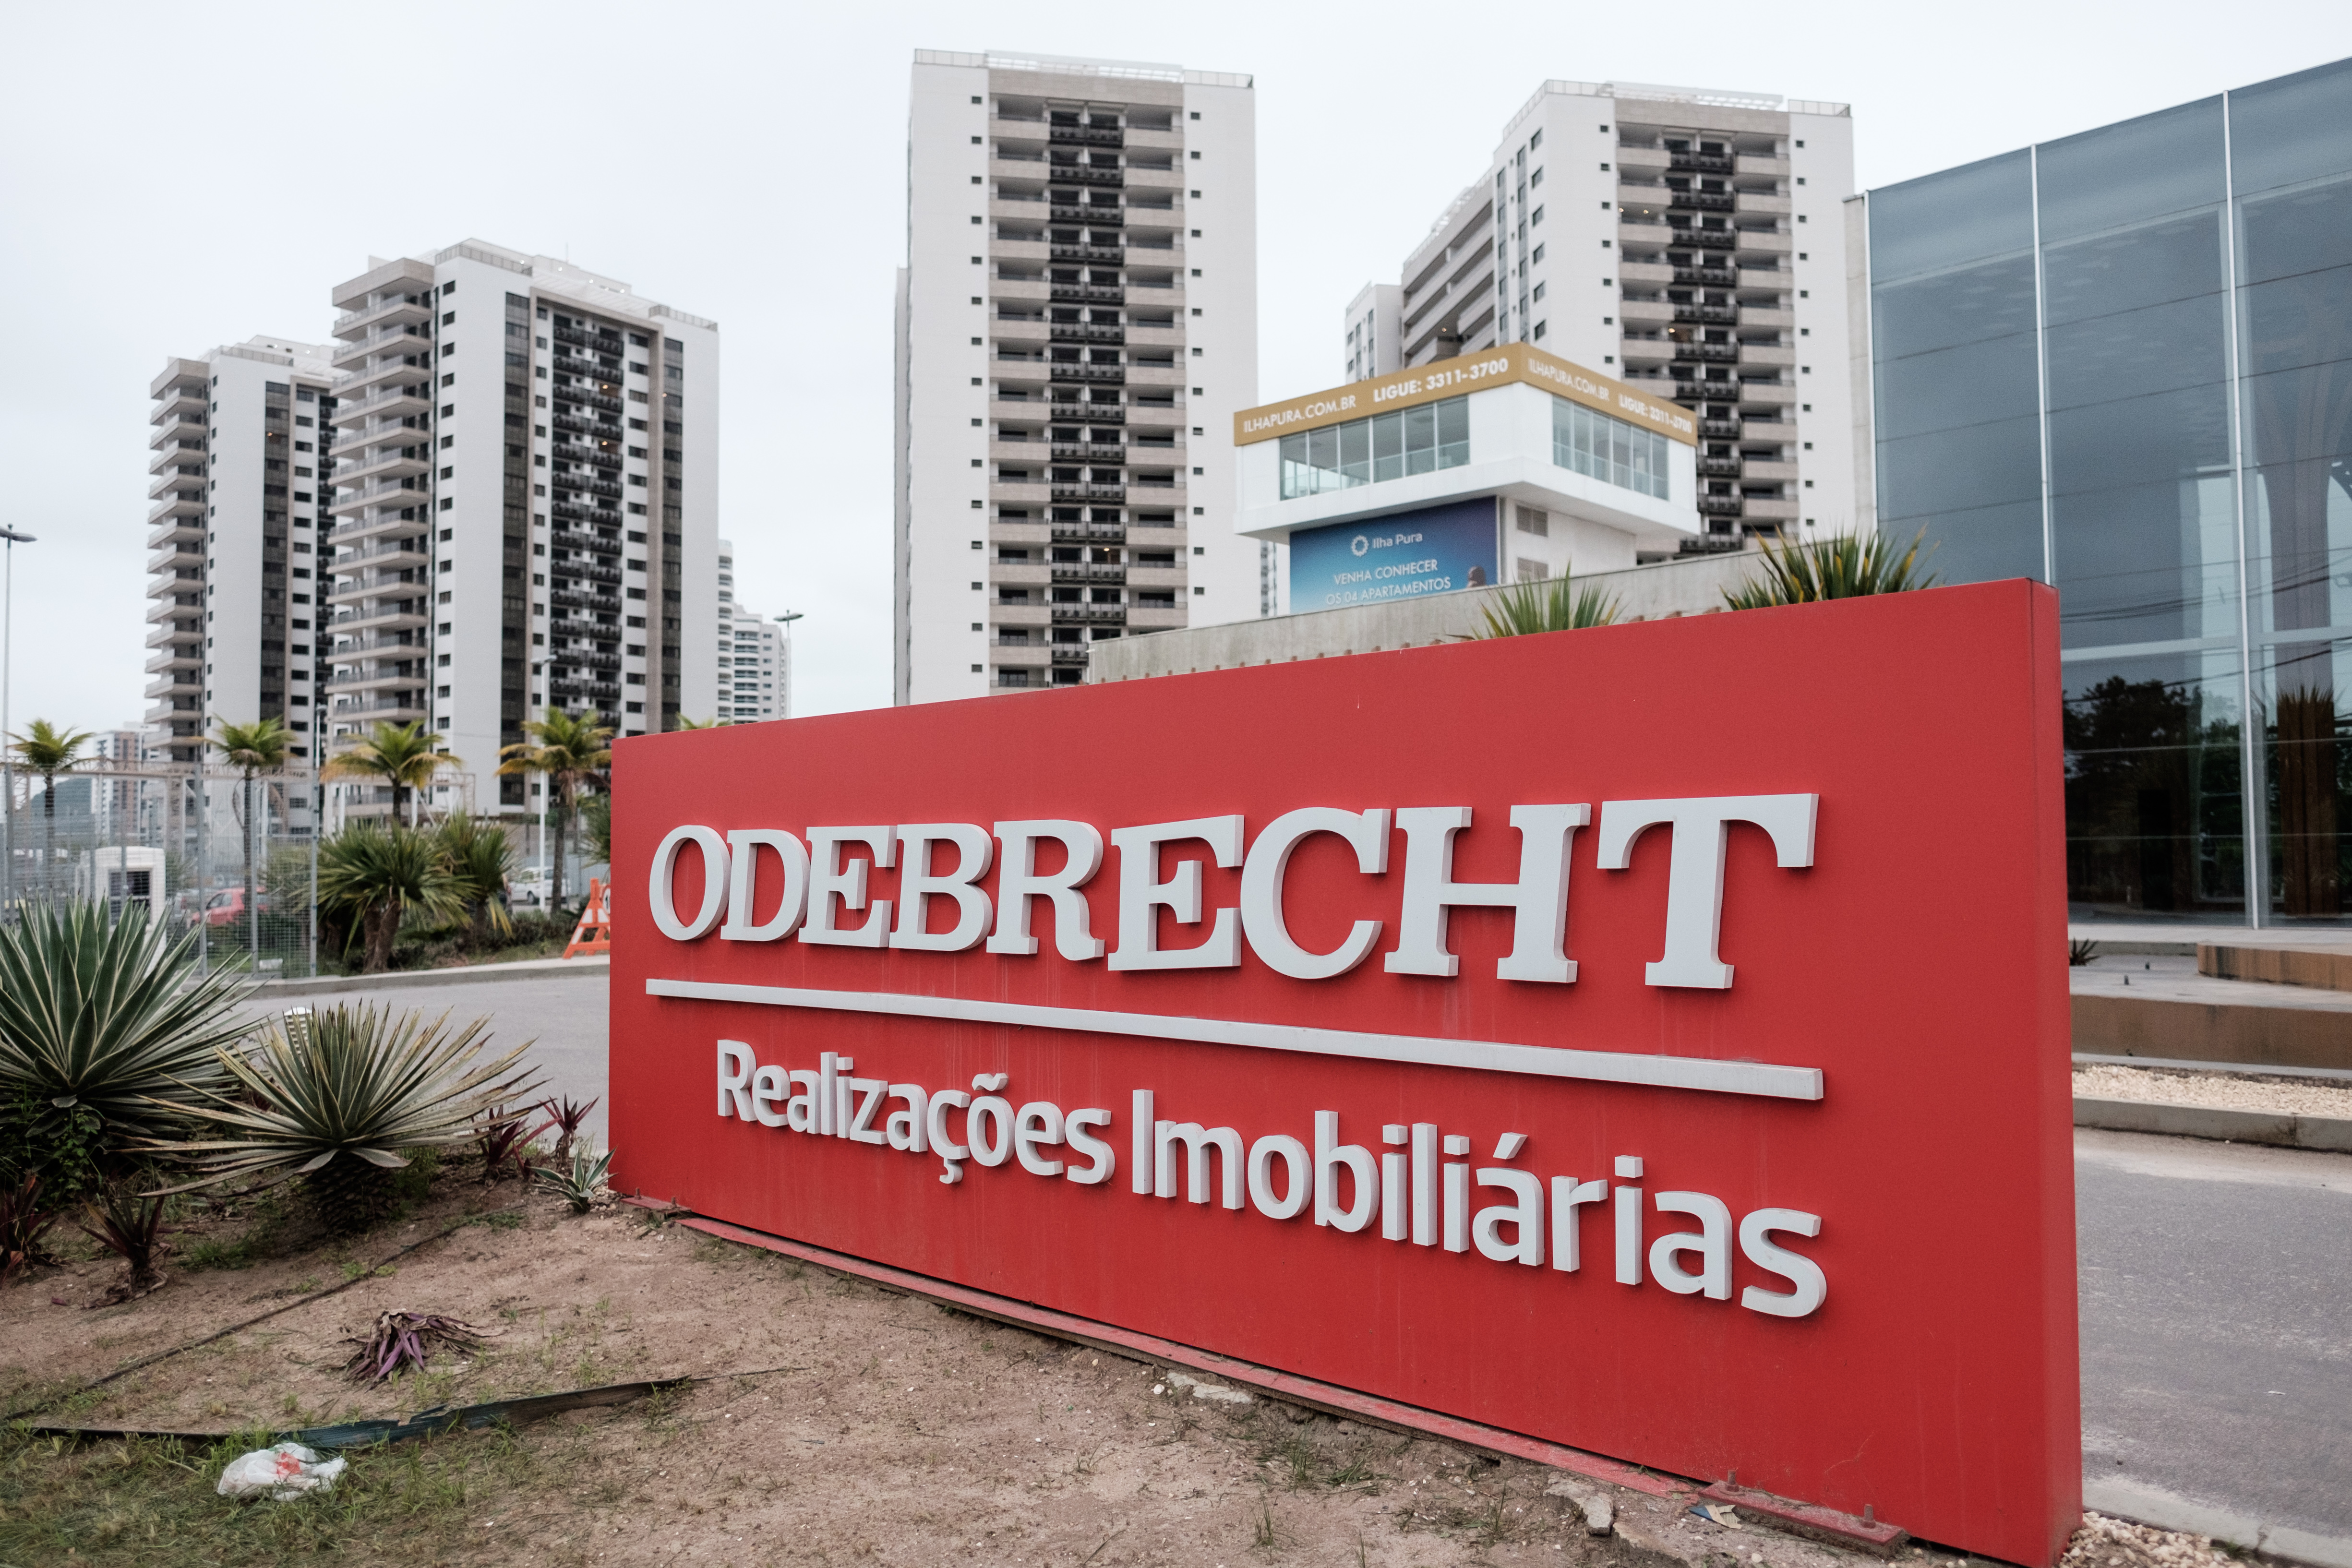 (FILES) This file photo taken on June 23, 2016 shows a logo of Brazilian construction company Odebrecht at the Olympic and Paralympic Village in Rio de Janeiro, Brazil. Brazil-based construction giant Odebrecht on December 21, 2016 agreed to pay fines of at least $2.6 billion to US, Brazilian and Swiss authorities, in what the US is calling the largest foreign bribery case in history. The US Justice Department said the conglomerate pled guilty to paying hundreds of millions to bribe government officials in countries on three continents.  / AFP PHOTO / YASUYOSHI CHIBA